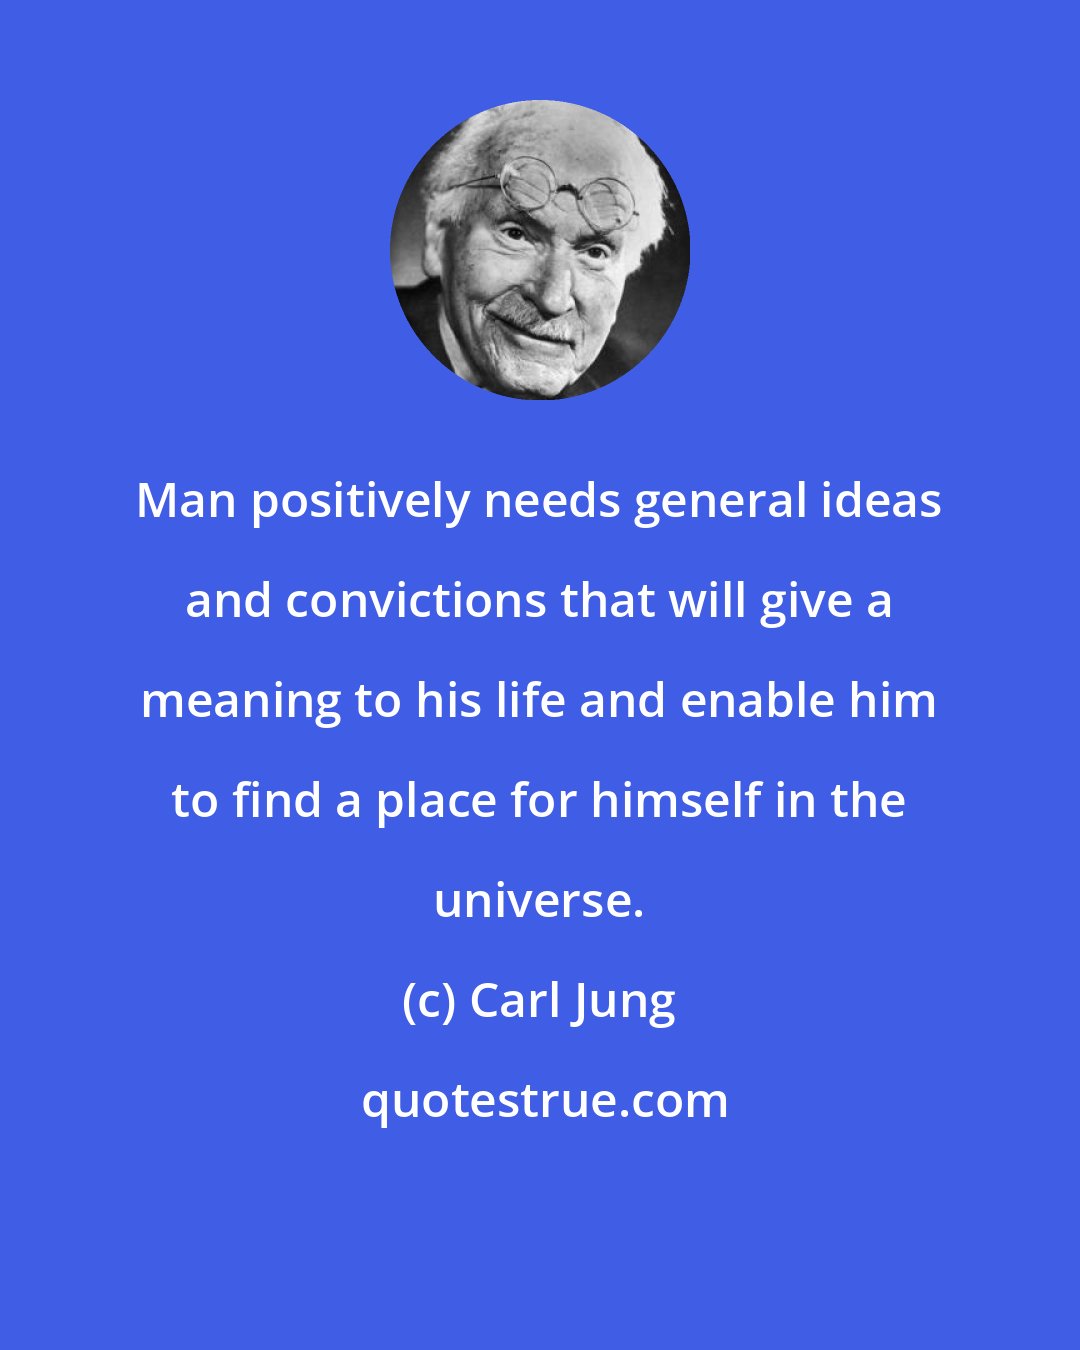 Carl Jung: Man positively needs general ideas and convictions that will give a meaning to his life and enable him to find a place for himself in the universe.